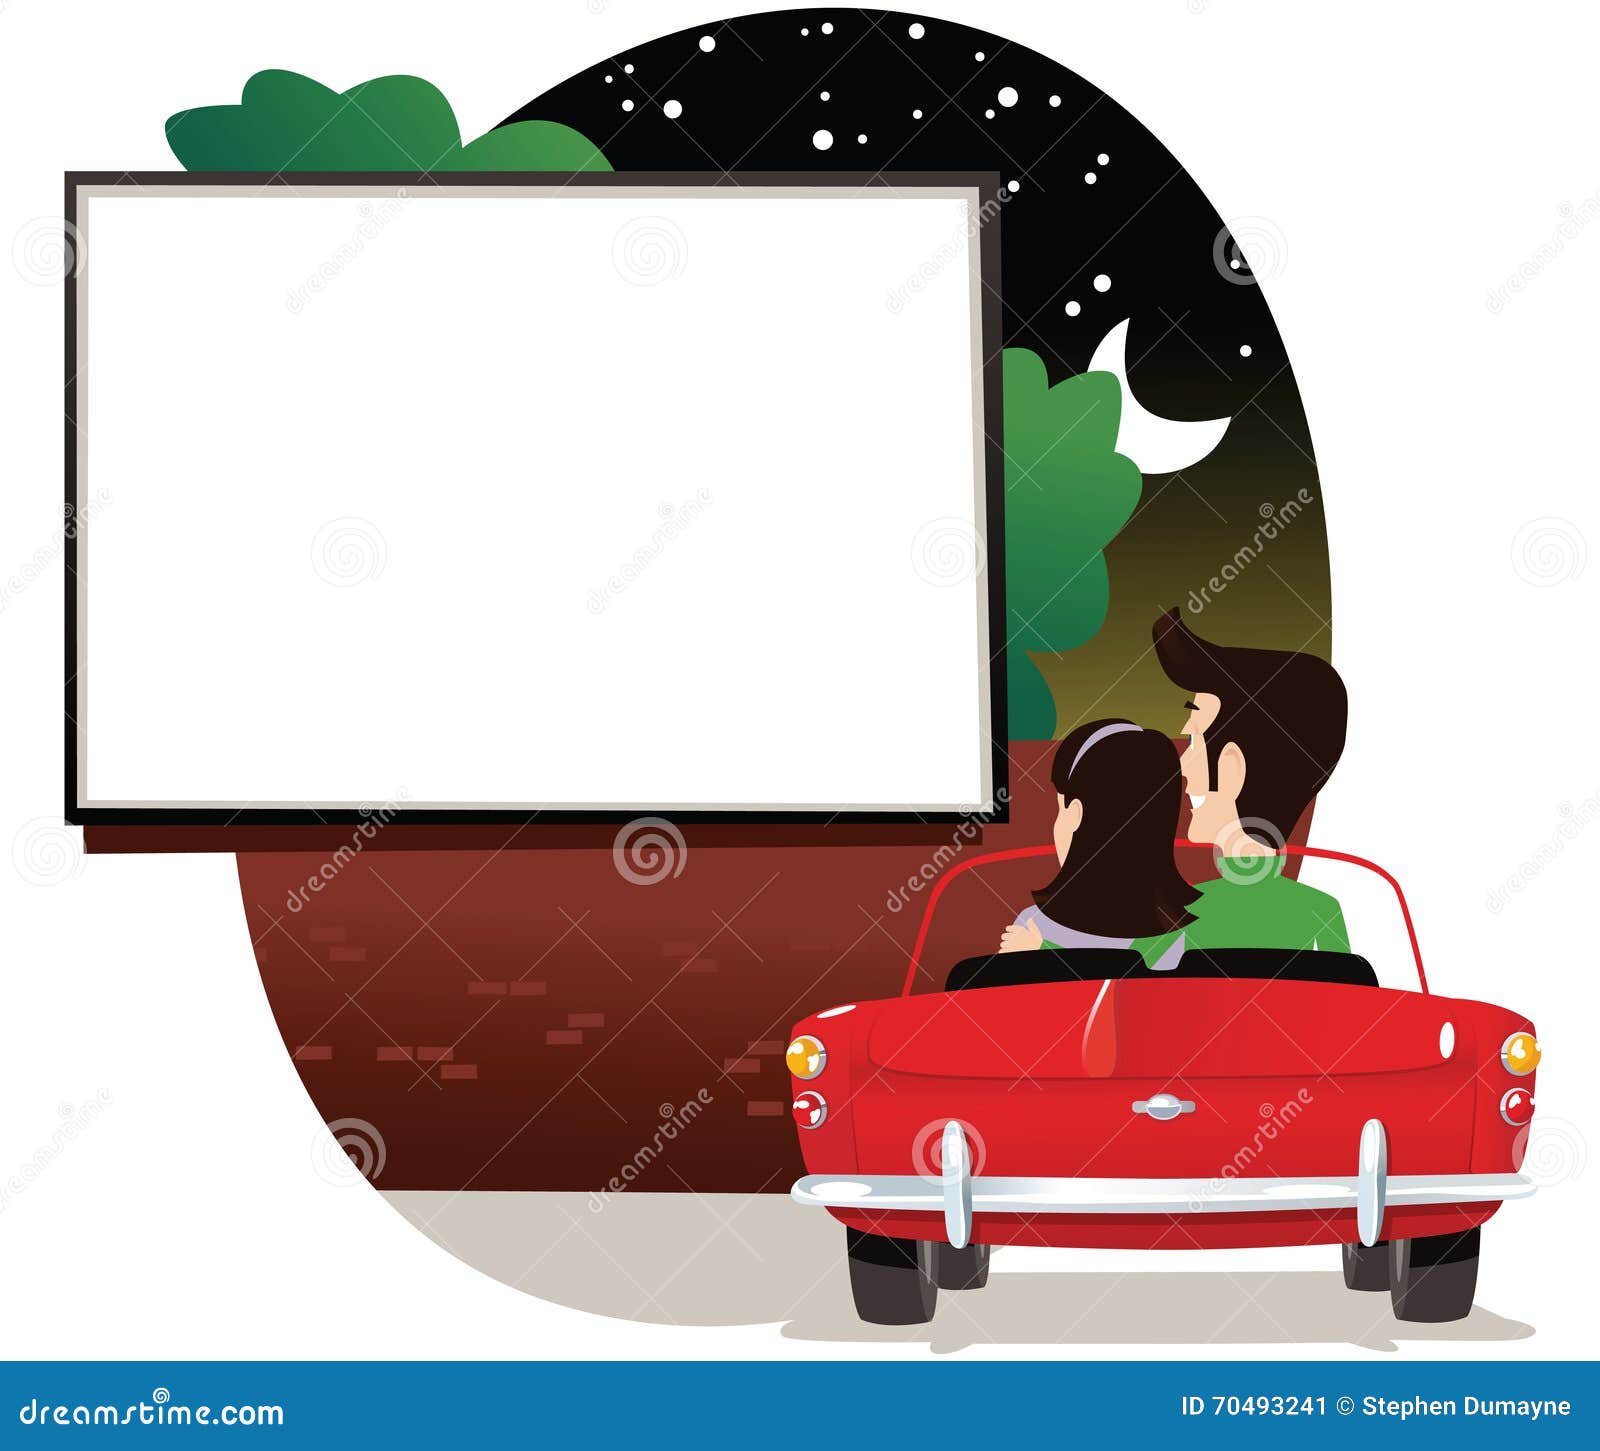 couple at drive in cinema